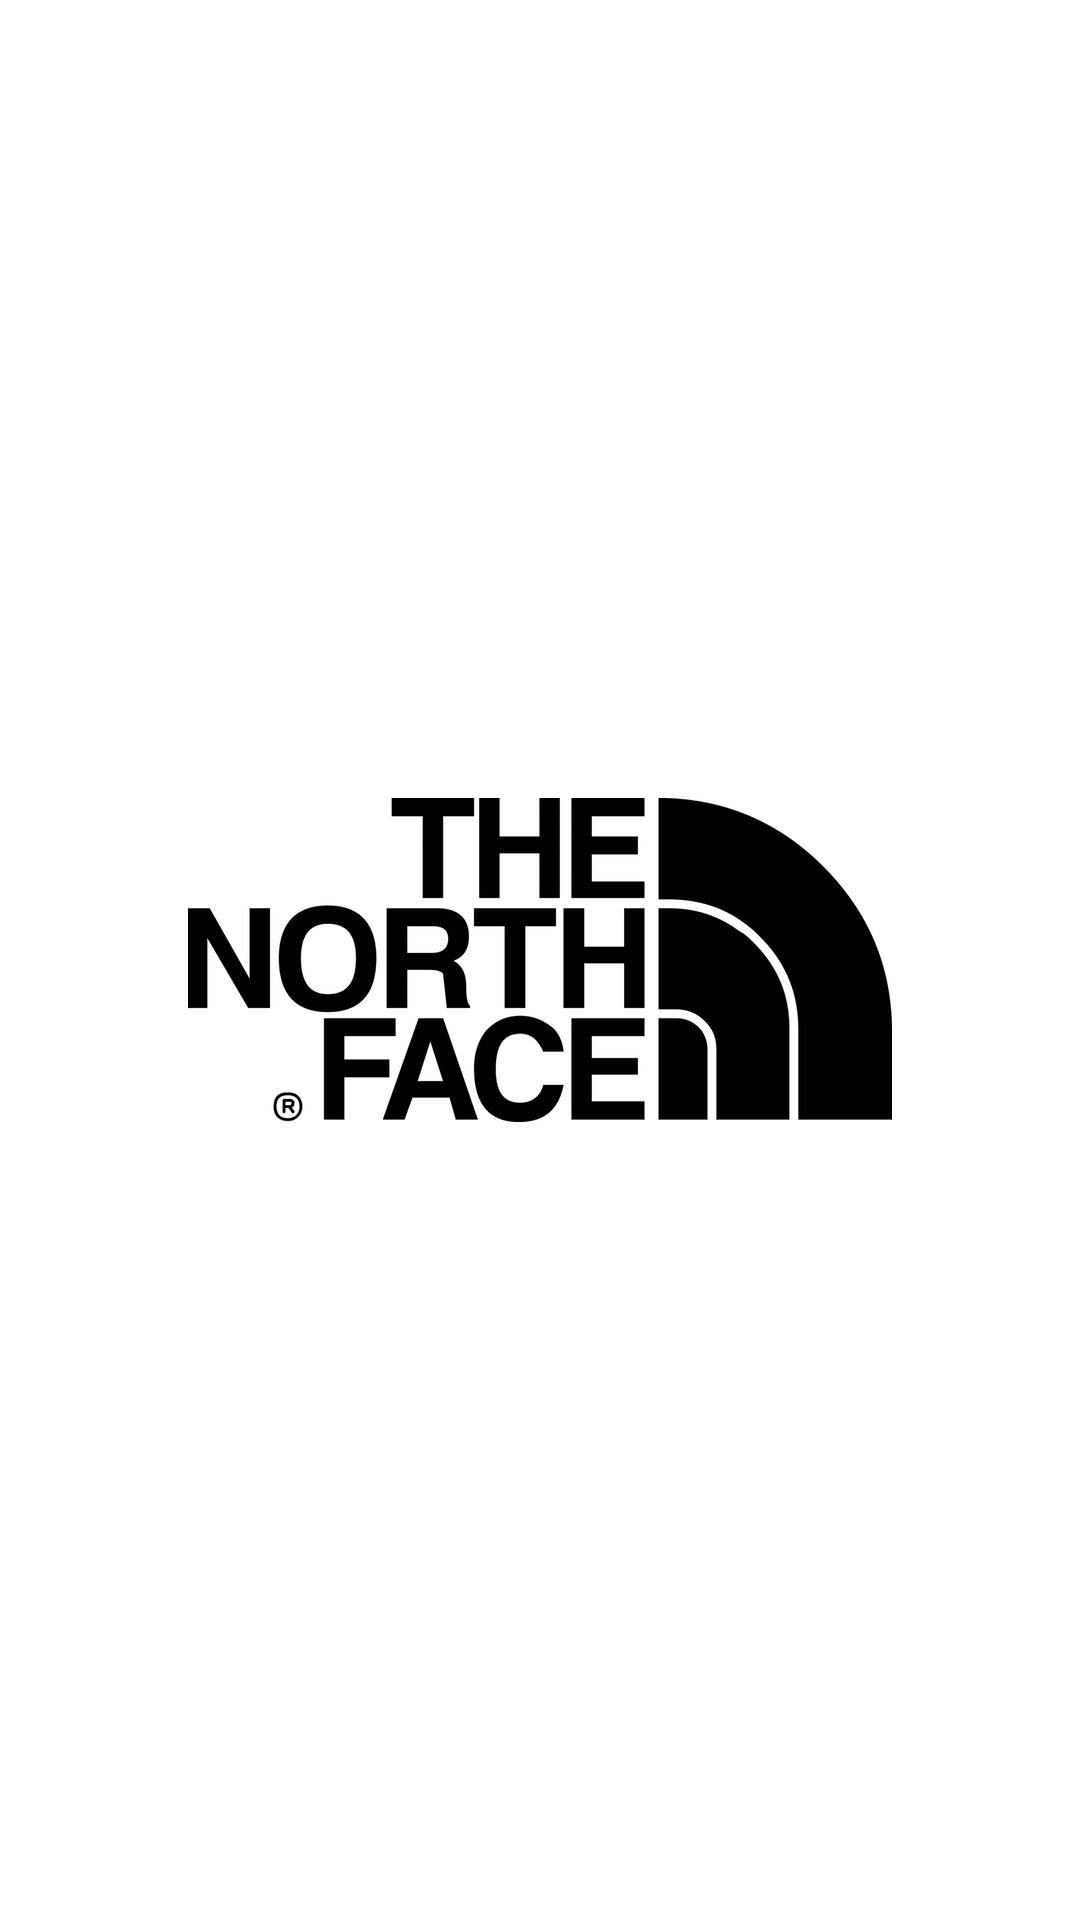 THE NORTH FACE iPhone Wallpaper Design in 2019 Hypebeast